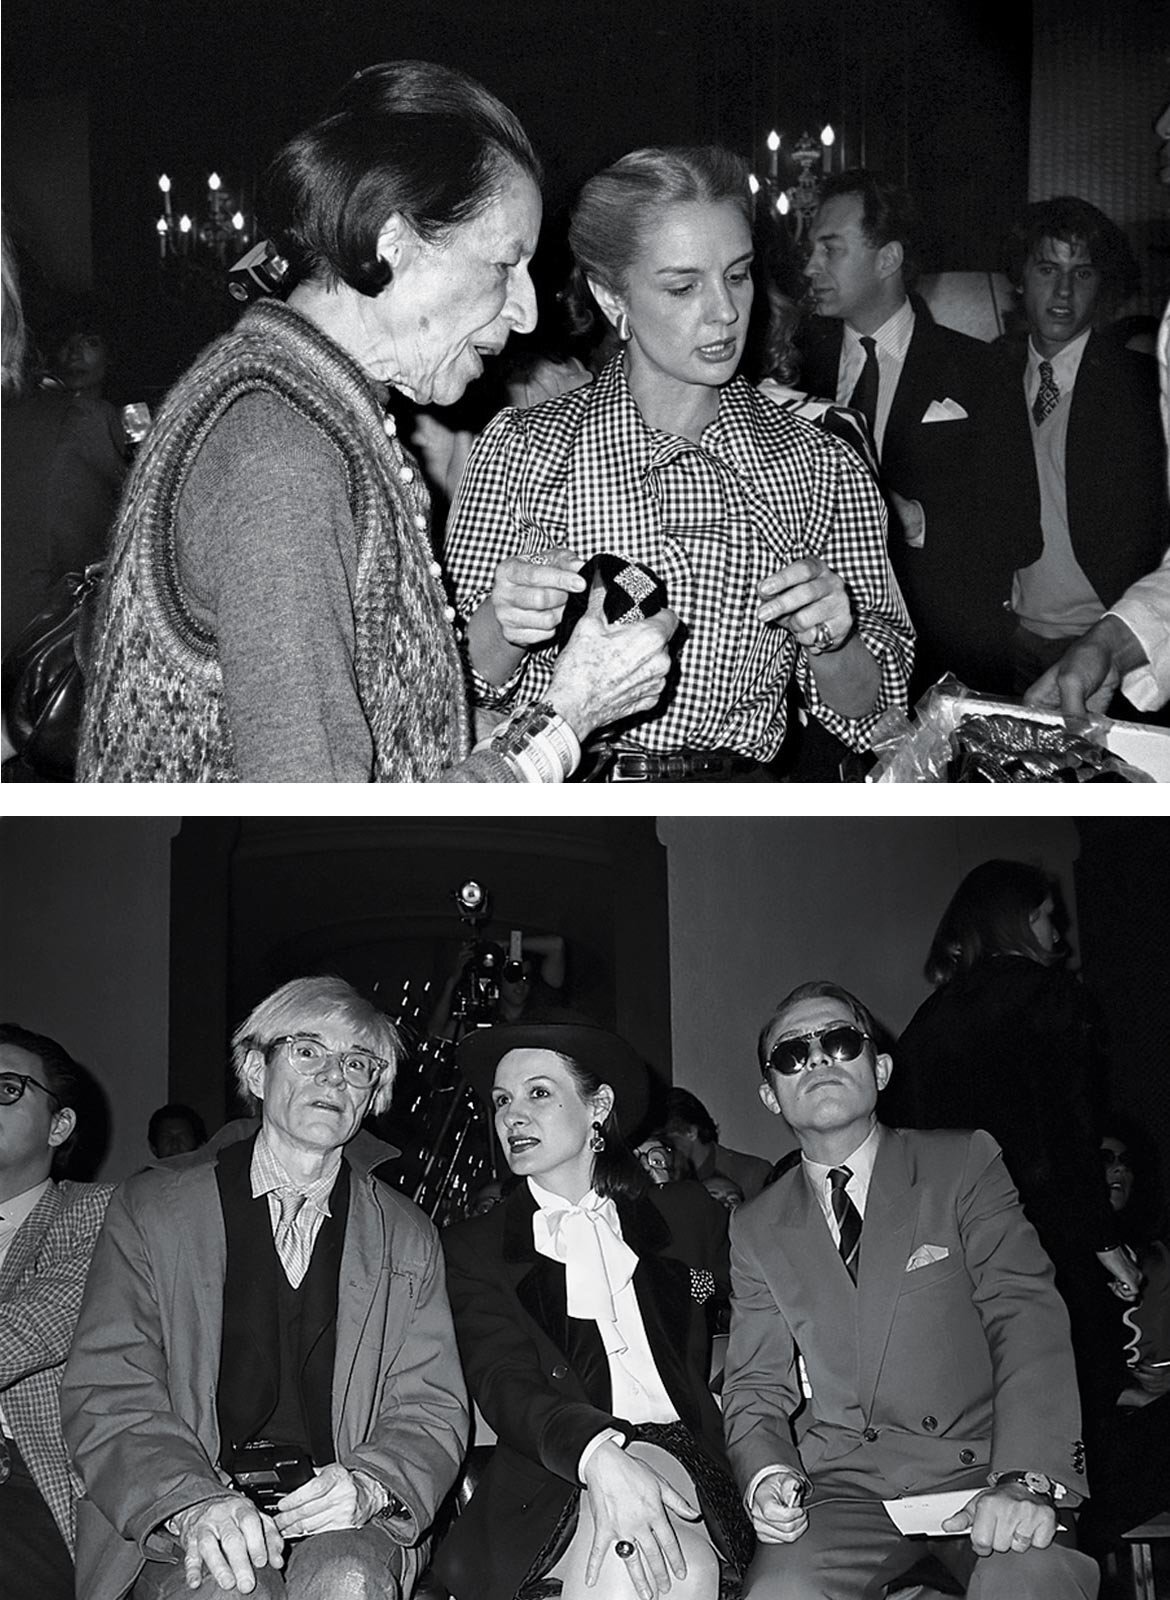  Top: Diana Vreeland and Herrera   Bottom: Andy Warhol, Paloma Picasso (daughter of Pablo Picasso) and husband Rafael Lopez Cambil. Credit...© Roxanne Lowit 